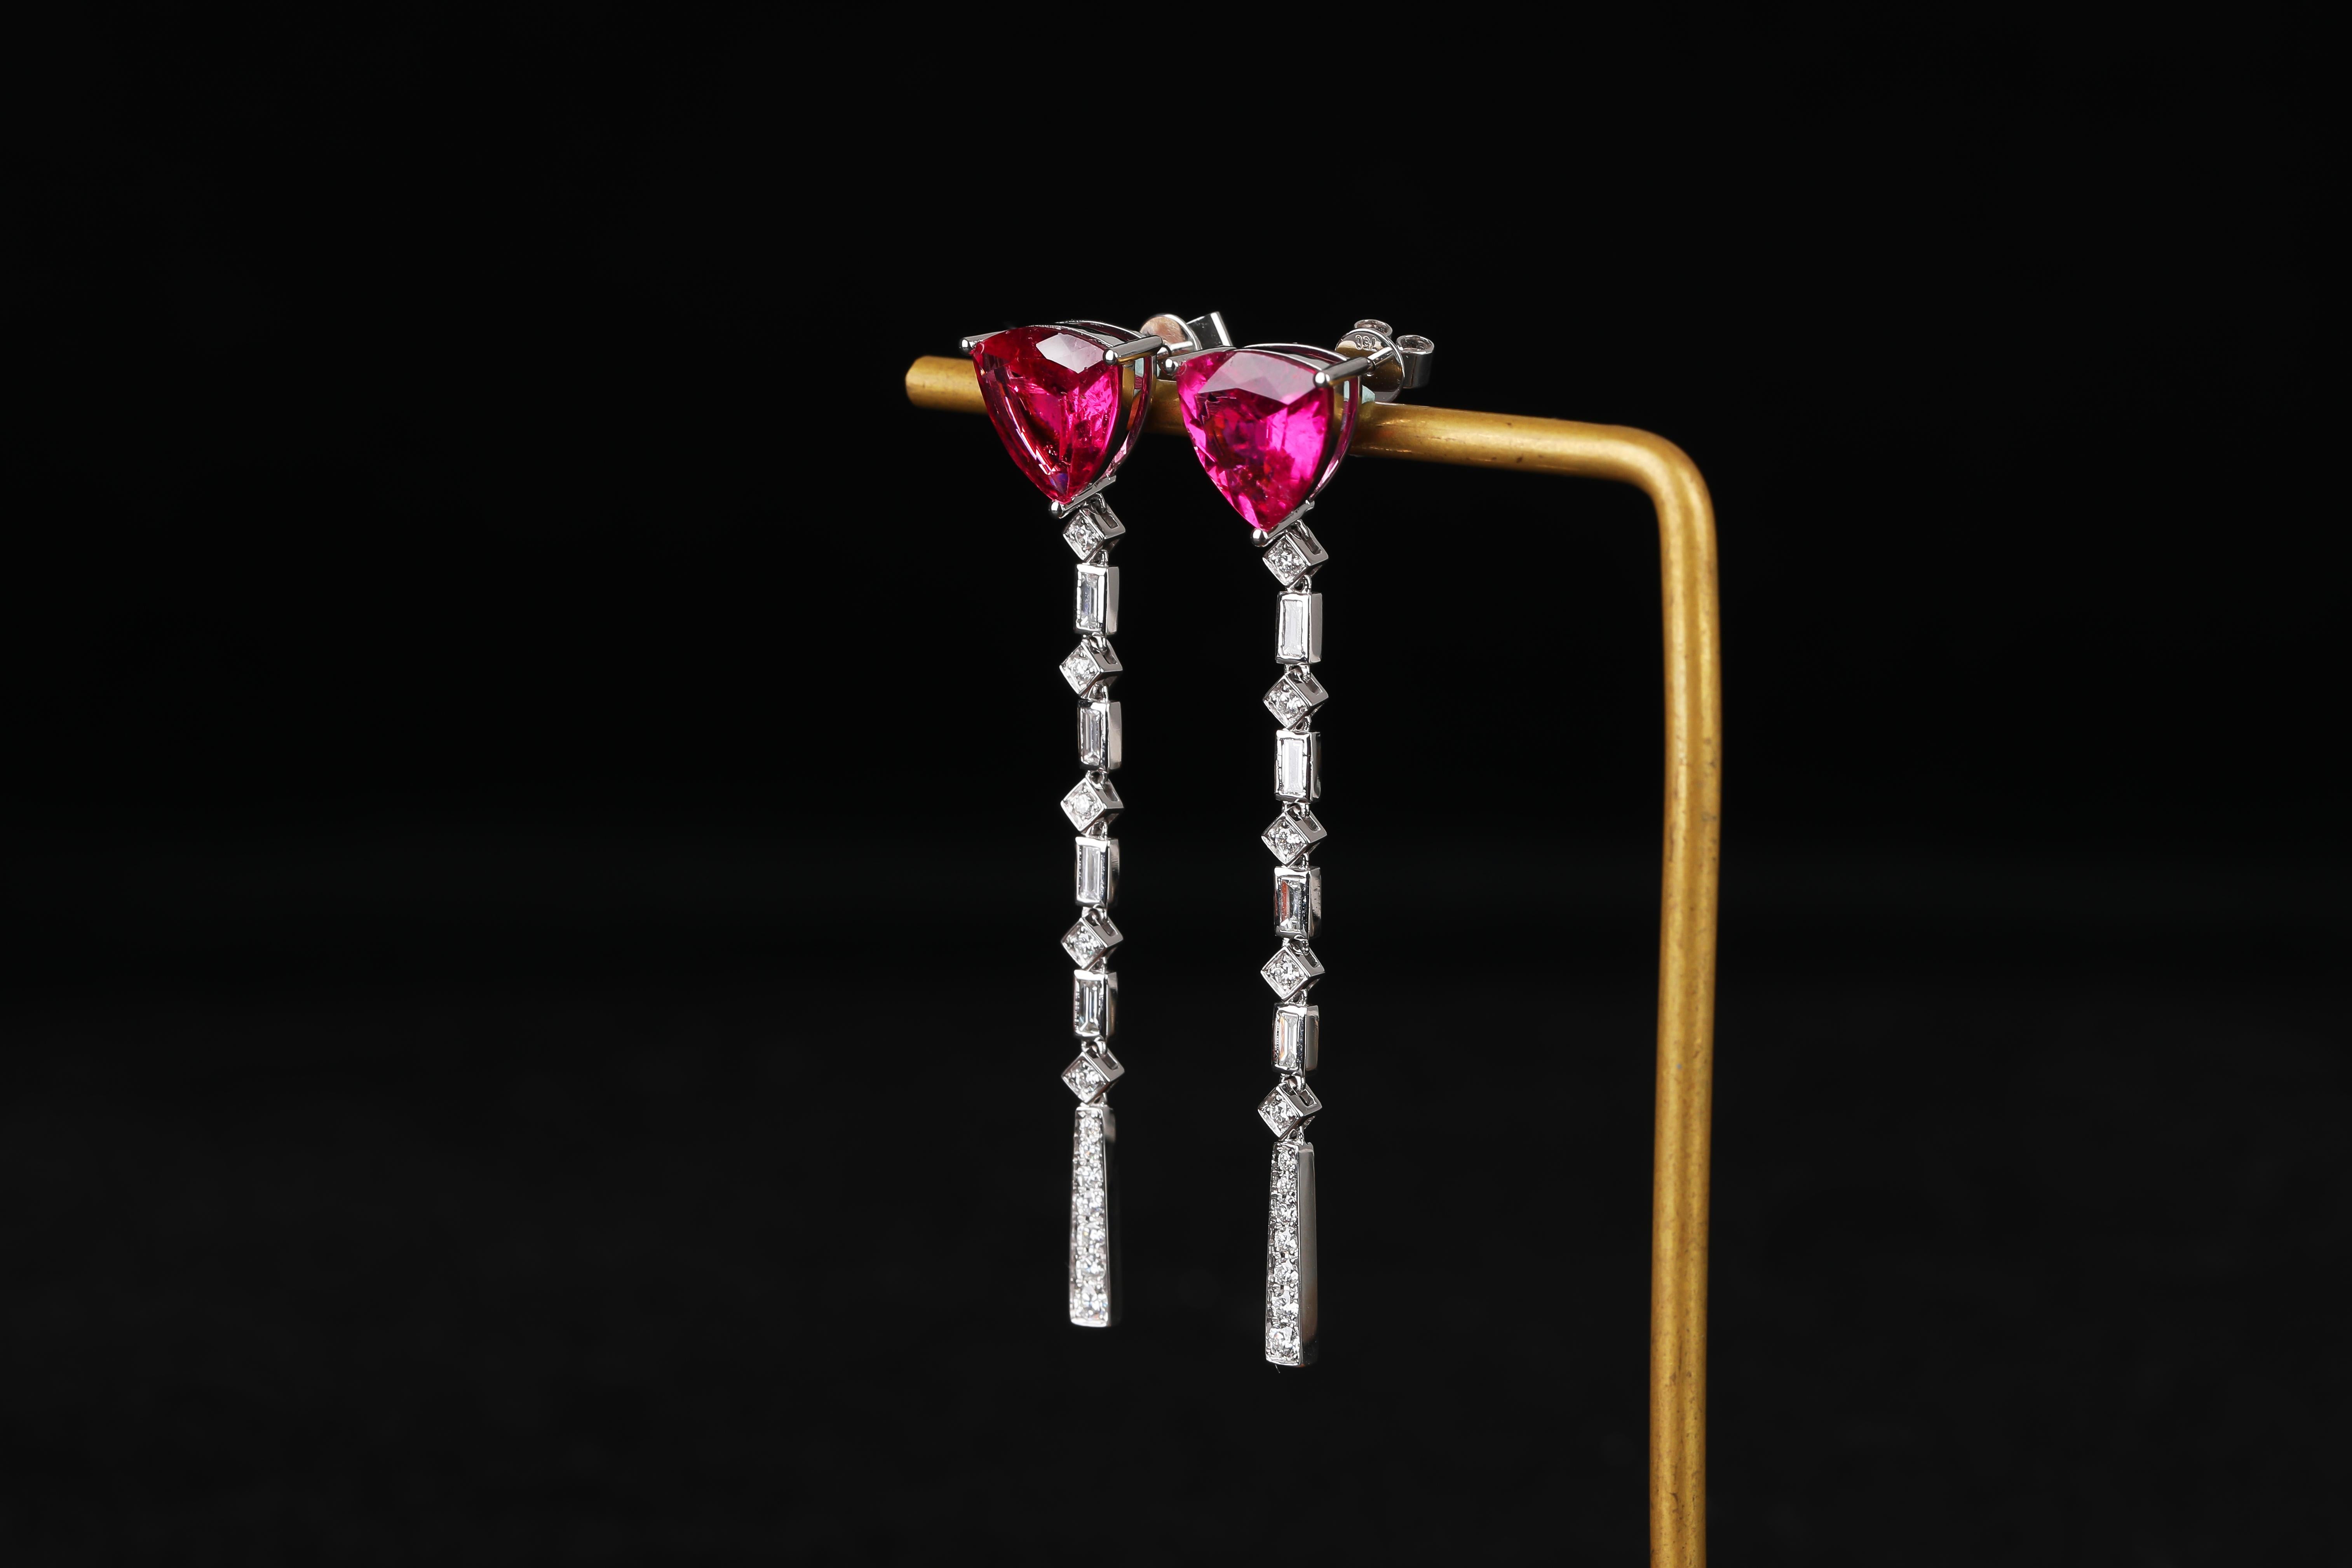 Rubellite Tourmaline and Diamond Earring in 18k Gold

The Tourmaline is of Purplish Red Colour and is known in the trade as 